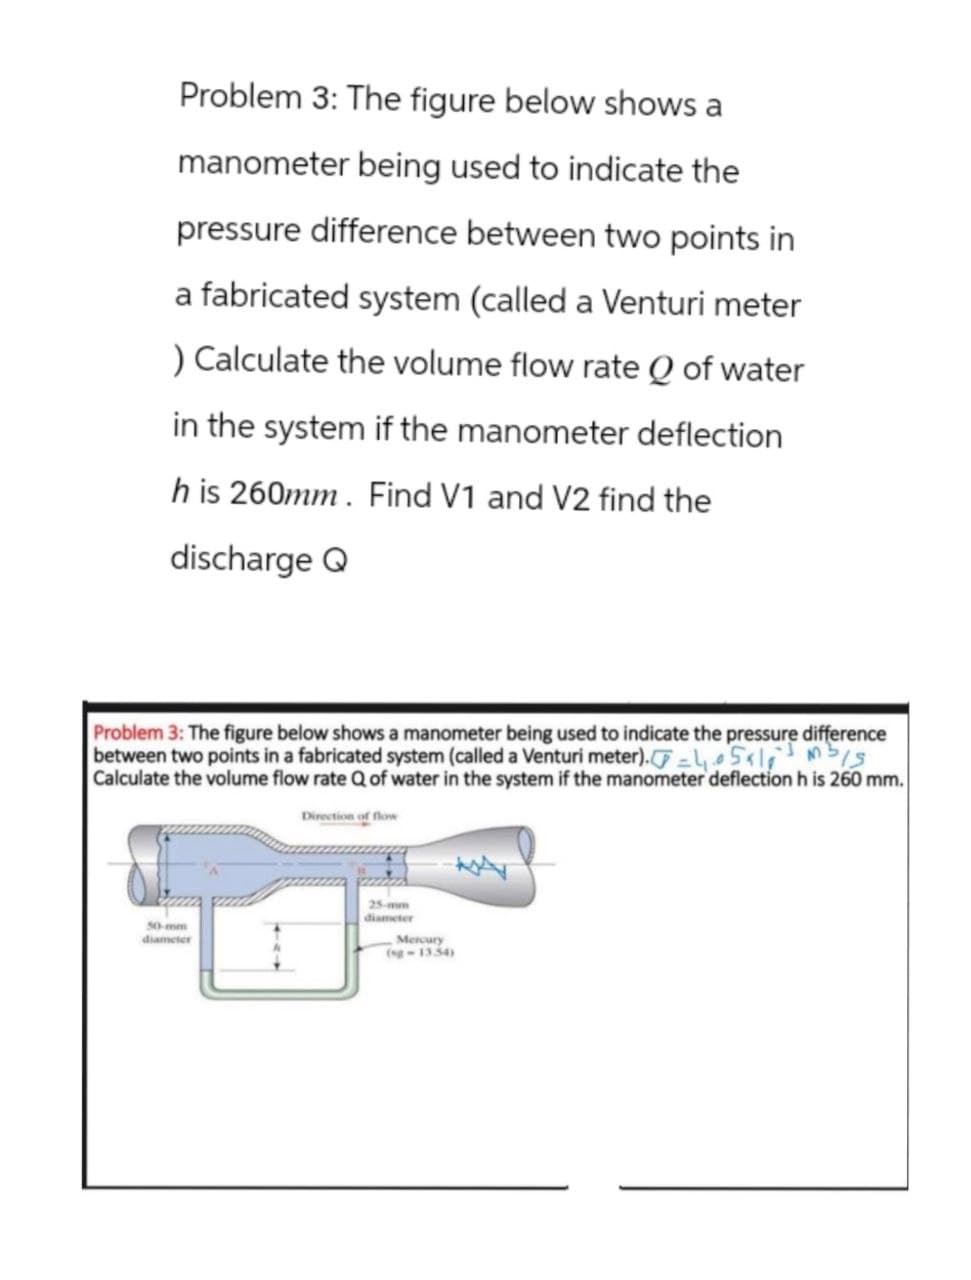 Problem 3: The figure below shows a
manometer being used to indicate the
pressure difference between two points in
a fabricated system (called a Venturi meter
) Calculate the volume flow rate Q of water
in the system if the manometer deflection
h is 260mm. Find V1 and V2 find the
discharge Q
Problem 3: The figure below shows a manometer being used to indicate the pressure difference
between two points in a fabricated system (called a Venturi meter).,5x10mb/s
Calculate the volume flow rate Q of water in the system if the manometer deflection h is 260 mm.
Direction of flow
50-mm
diameter
diameter
Mercury
(sg-1354)